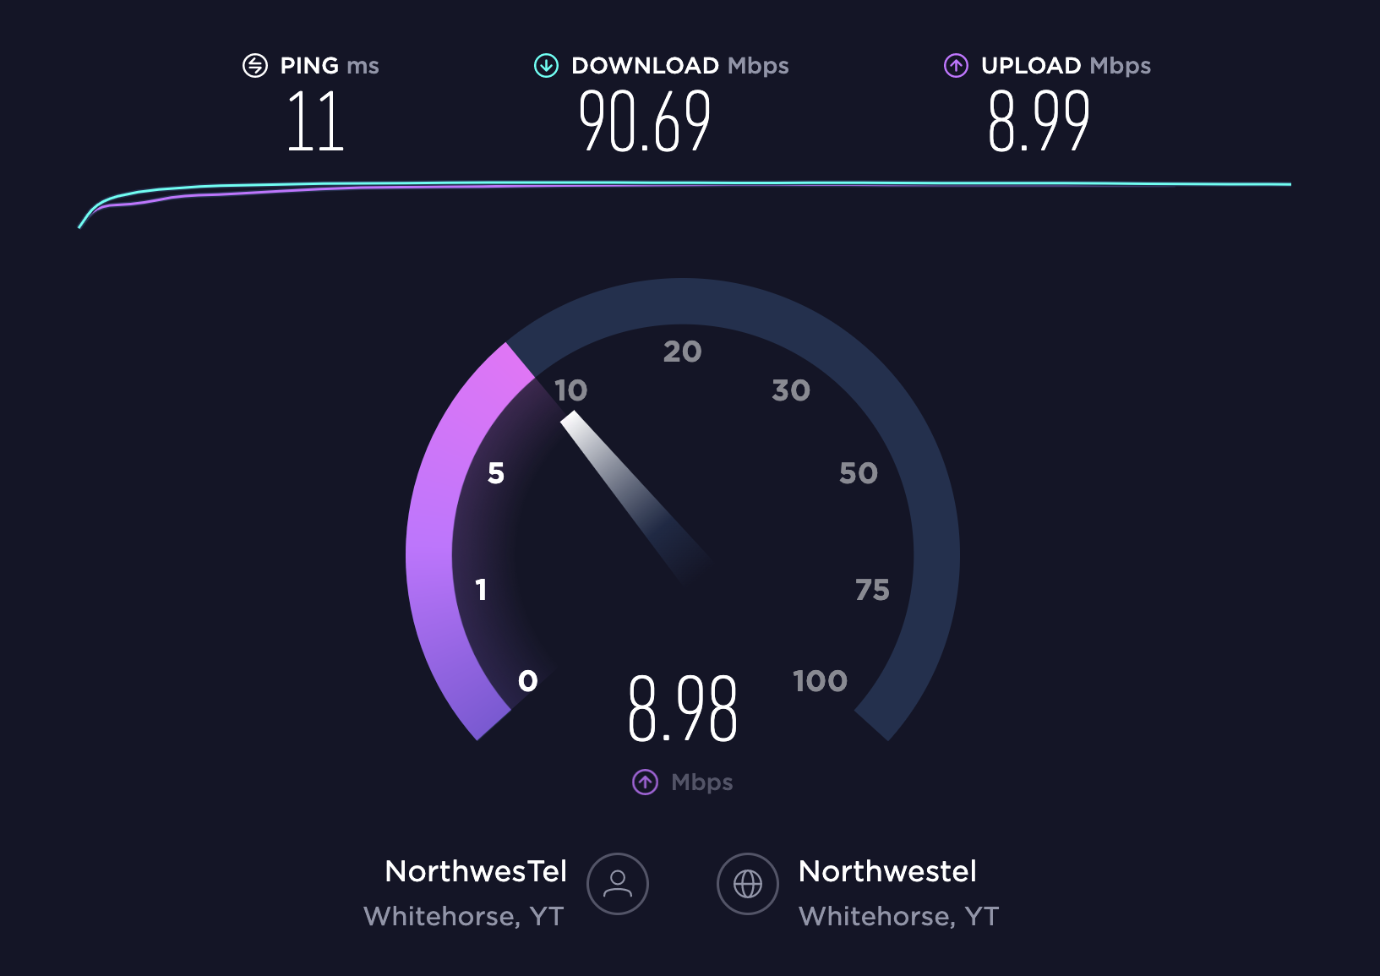 A composite screenshot from speedtest.net, showing a speedometer-type indicator of upload speed (currently 8.98 Mbps upload) and a timeline chart above. The summary numbers at the top show a Ping time of 11ms, a Download speed of 90.69 Mbps, and an Upload speed of 8.99 Mbps. At the bottom, the network description text shows Northwestel and Whitehorse, YT on both ends.